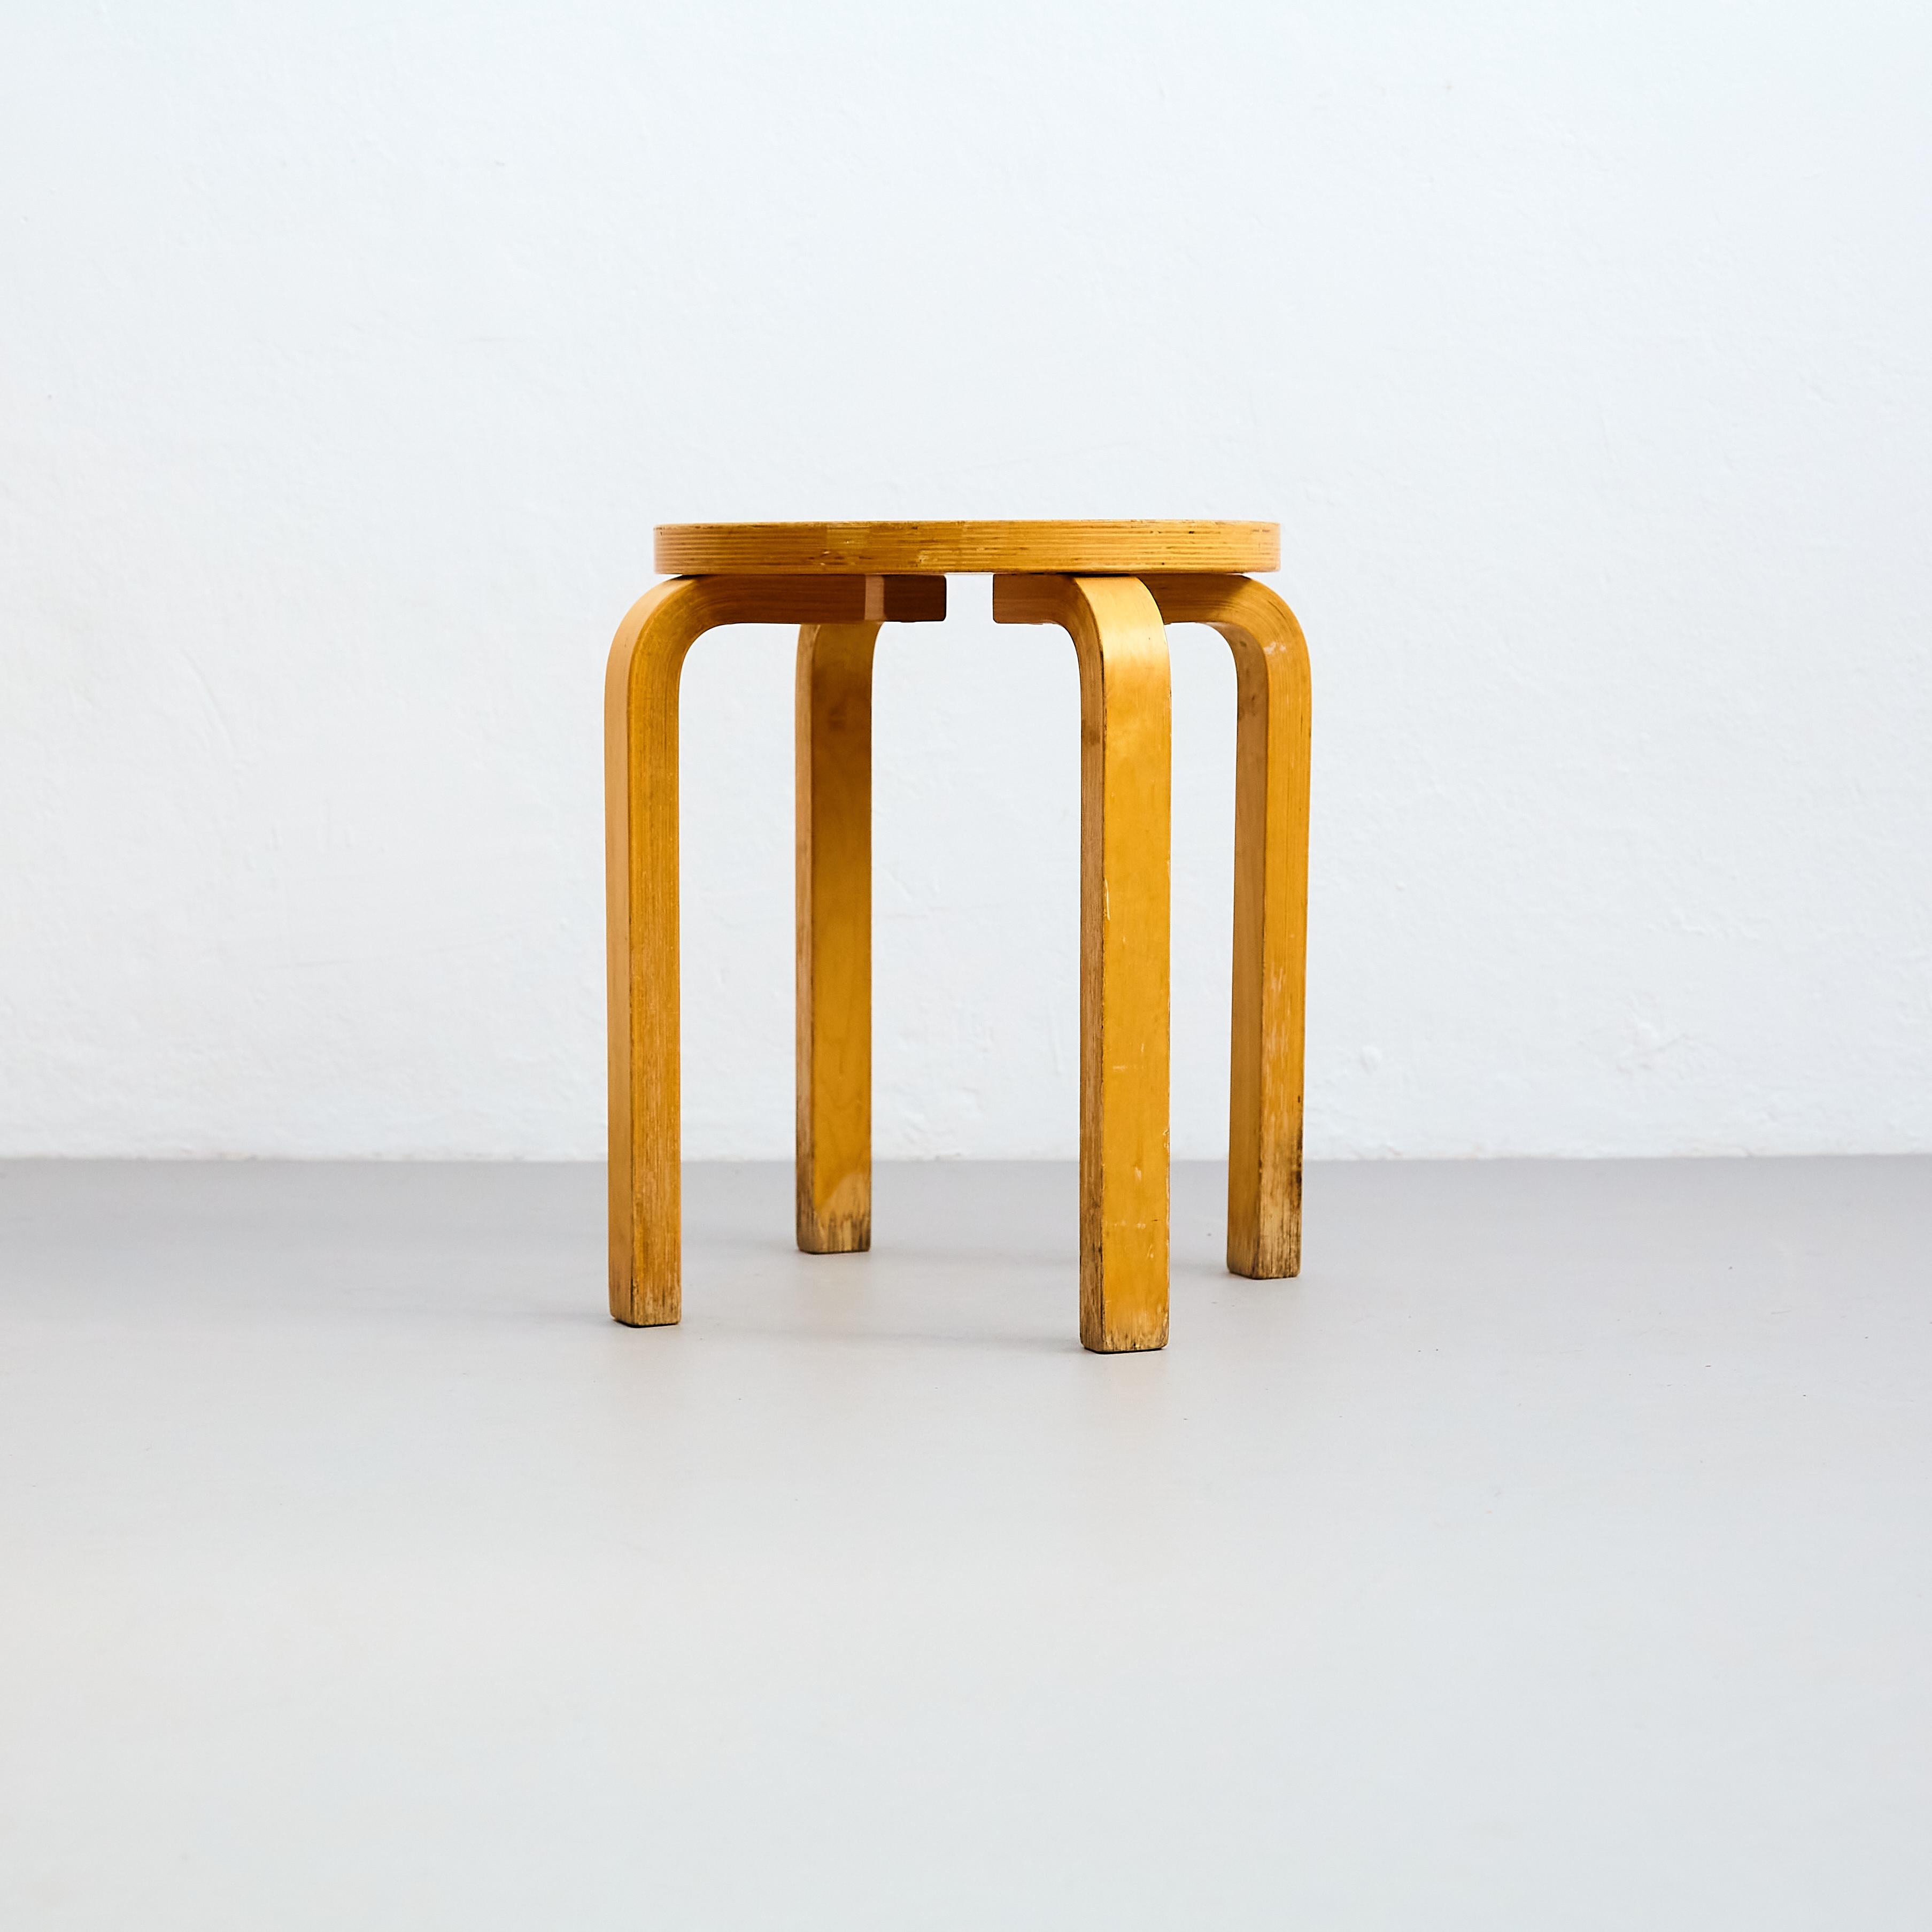 Alvar Aalto Style Mid-Century Modern Wood Stool, circa 1960 In Good Condition For Sale In Barcelona, Barcelona